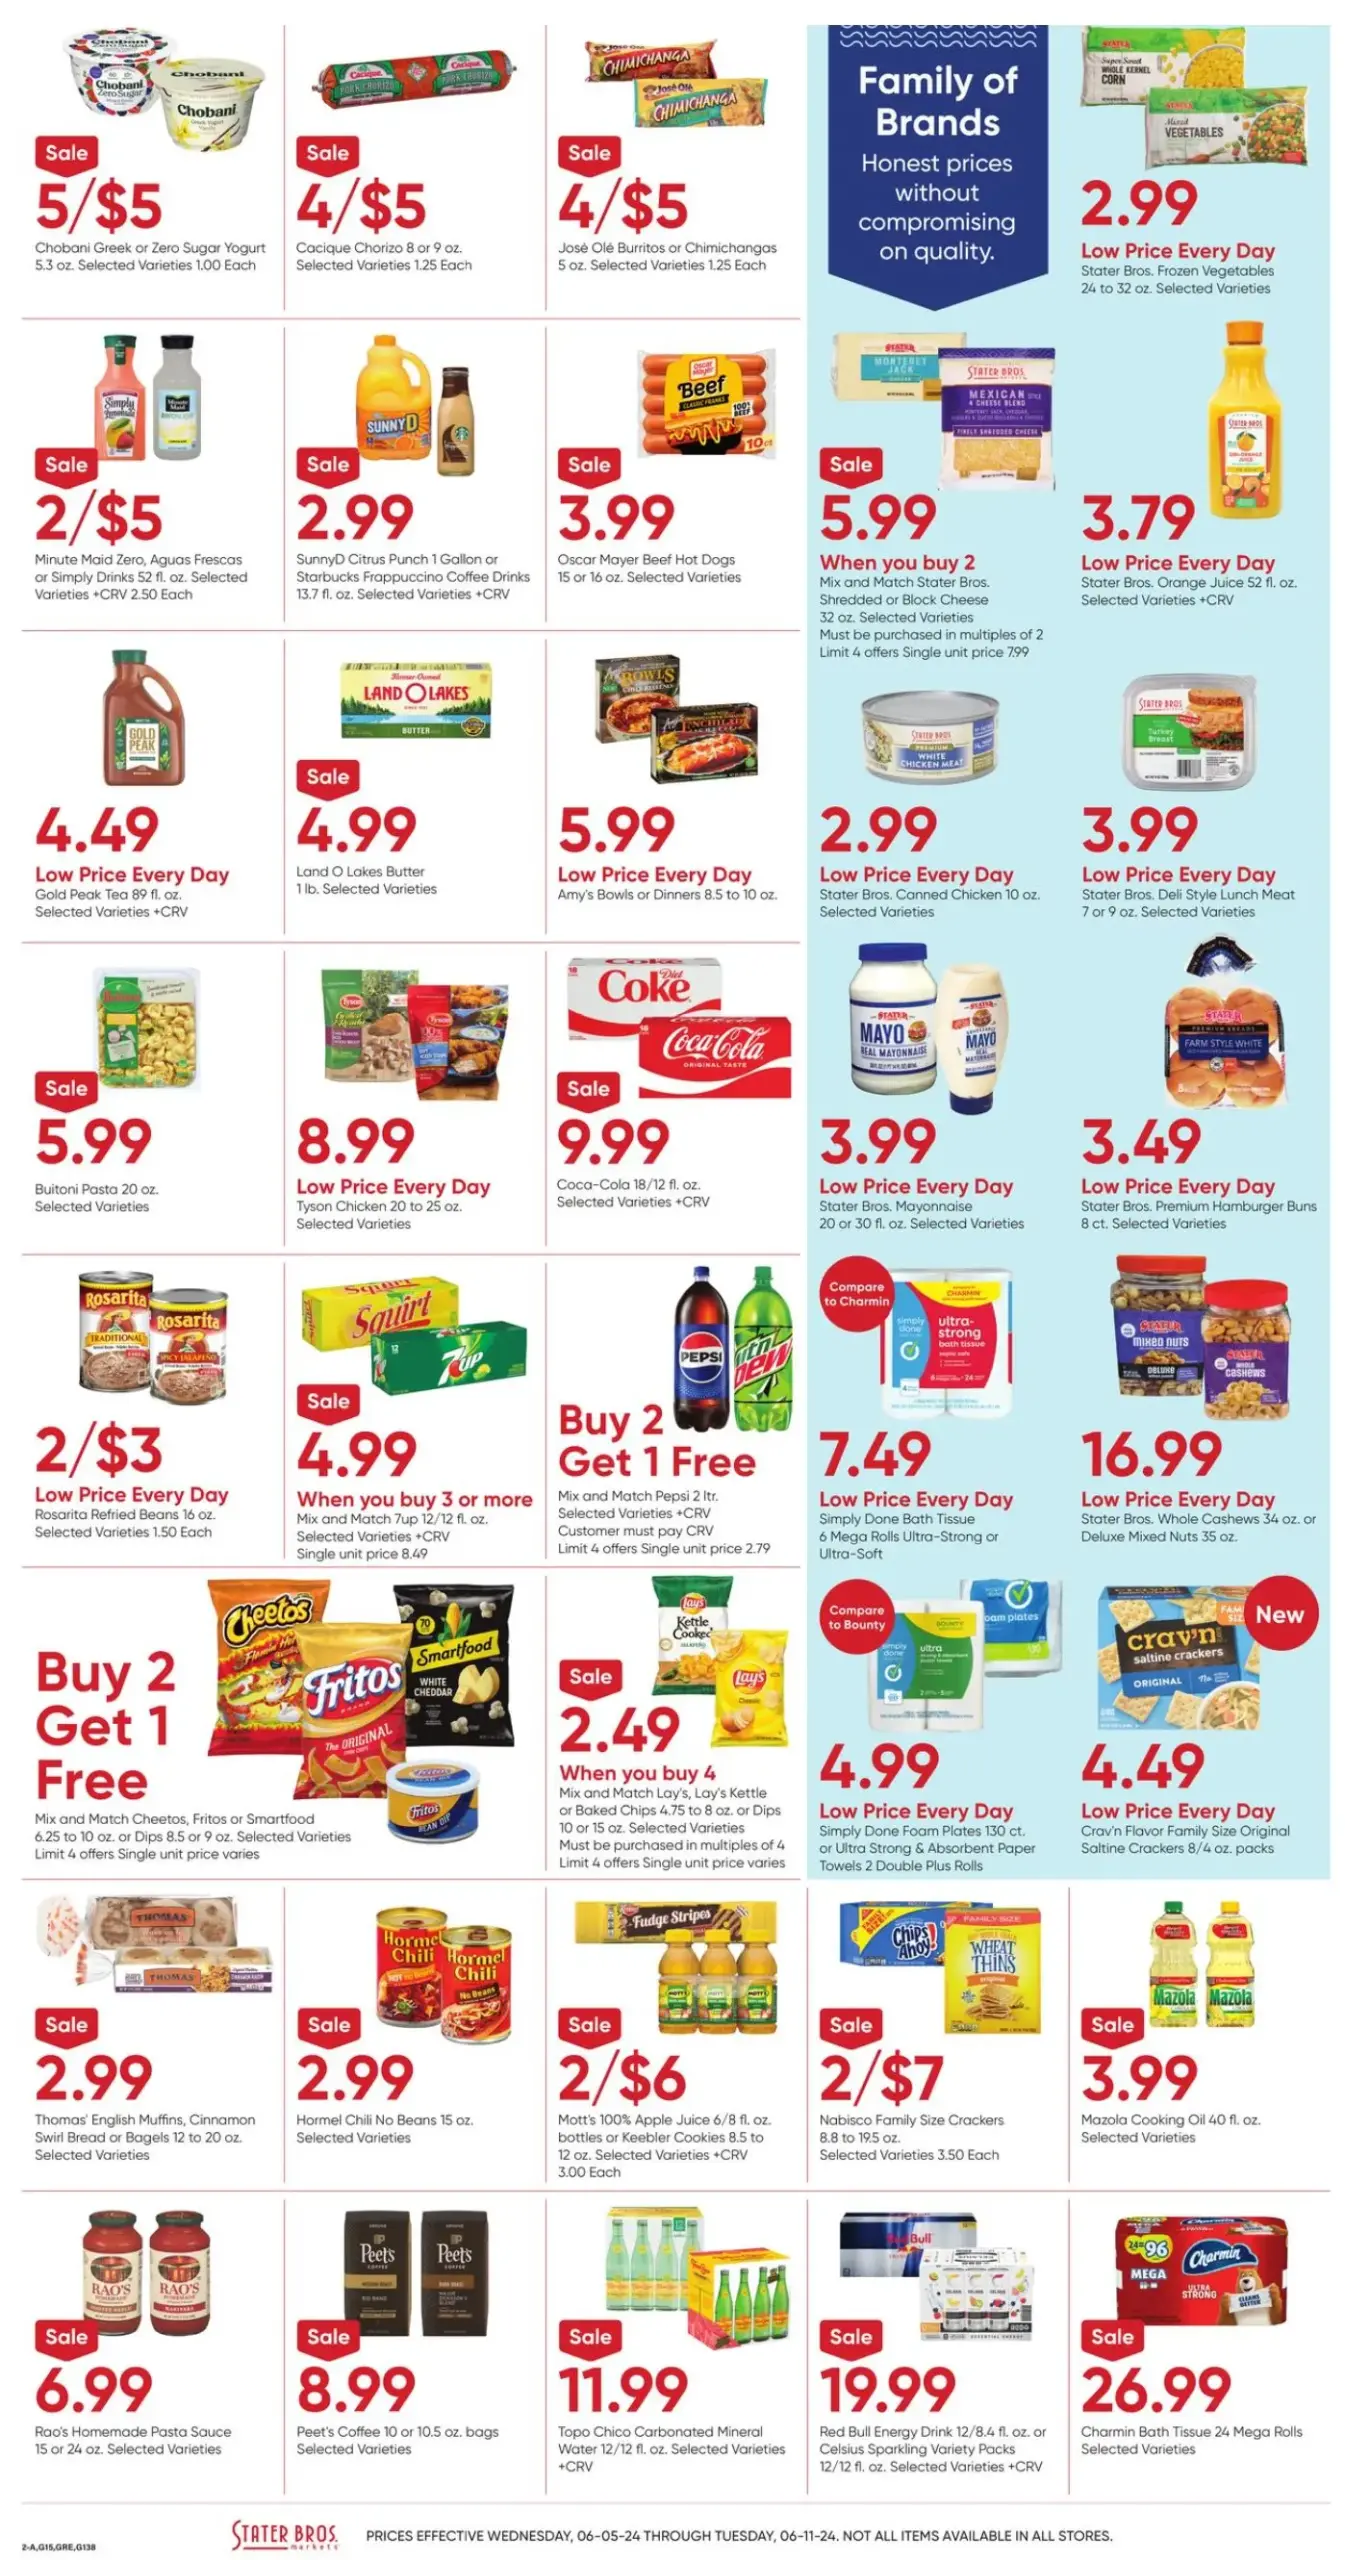 Stater Bros July 2024 Weekly Sales, Deals, Discounts and Digital Coupons.